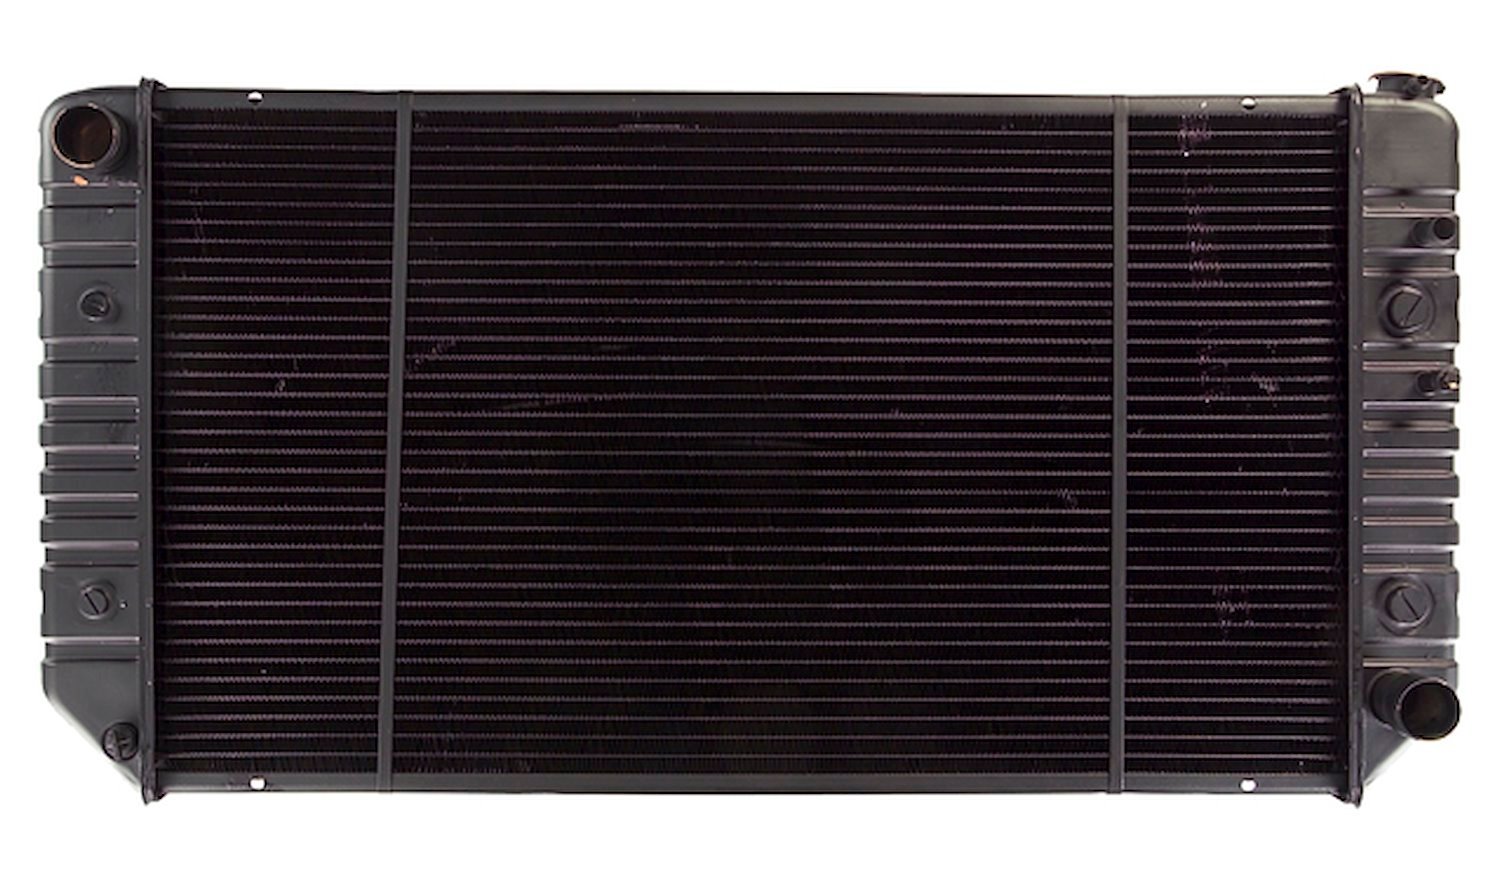 Replacement Radiator Fits Select 1982-1991 Chevrolet & GMC Trucks w/7.4L Gas & w/6.2L Detroit Diesel Engines [3-Row]